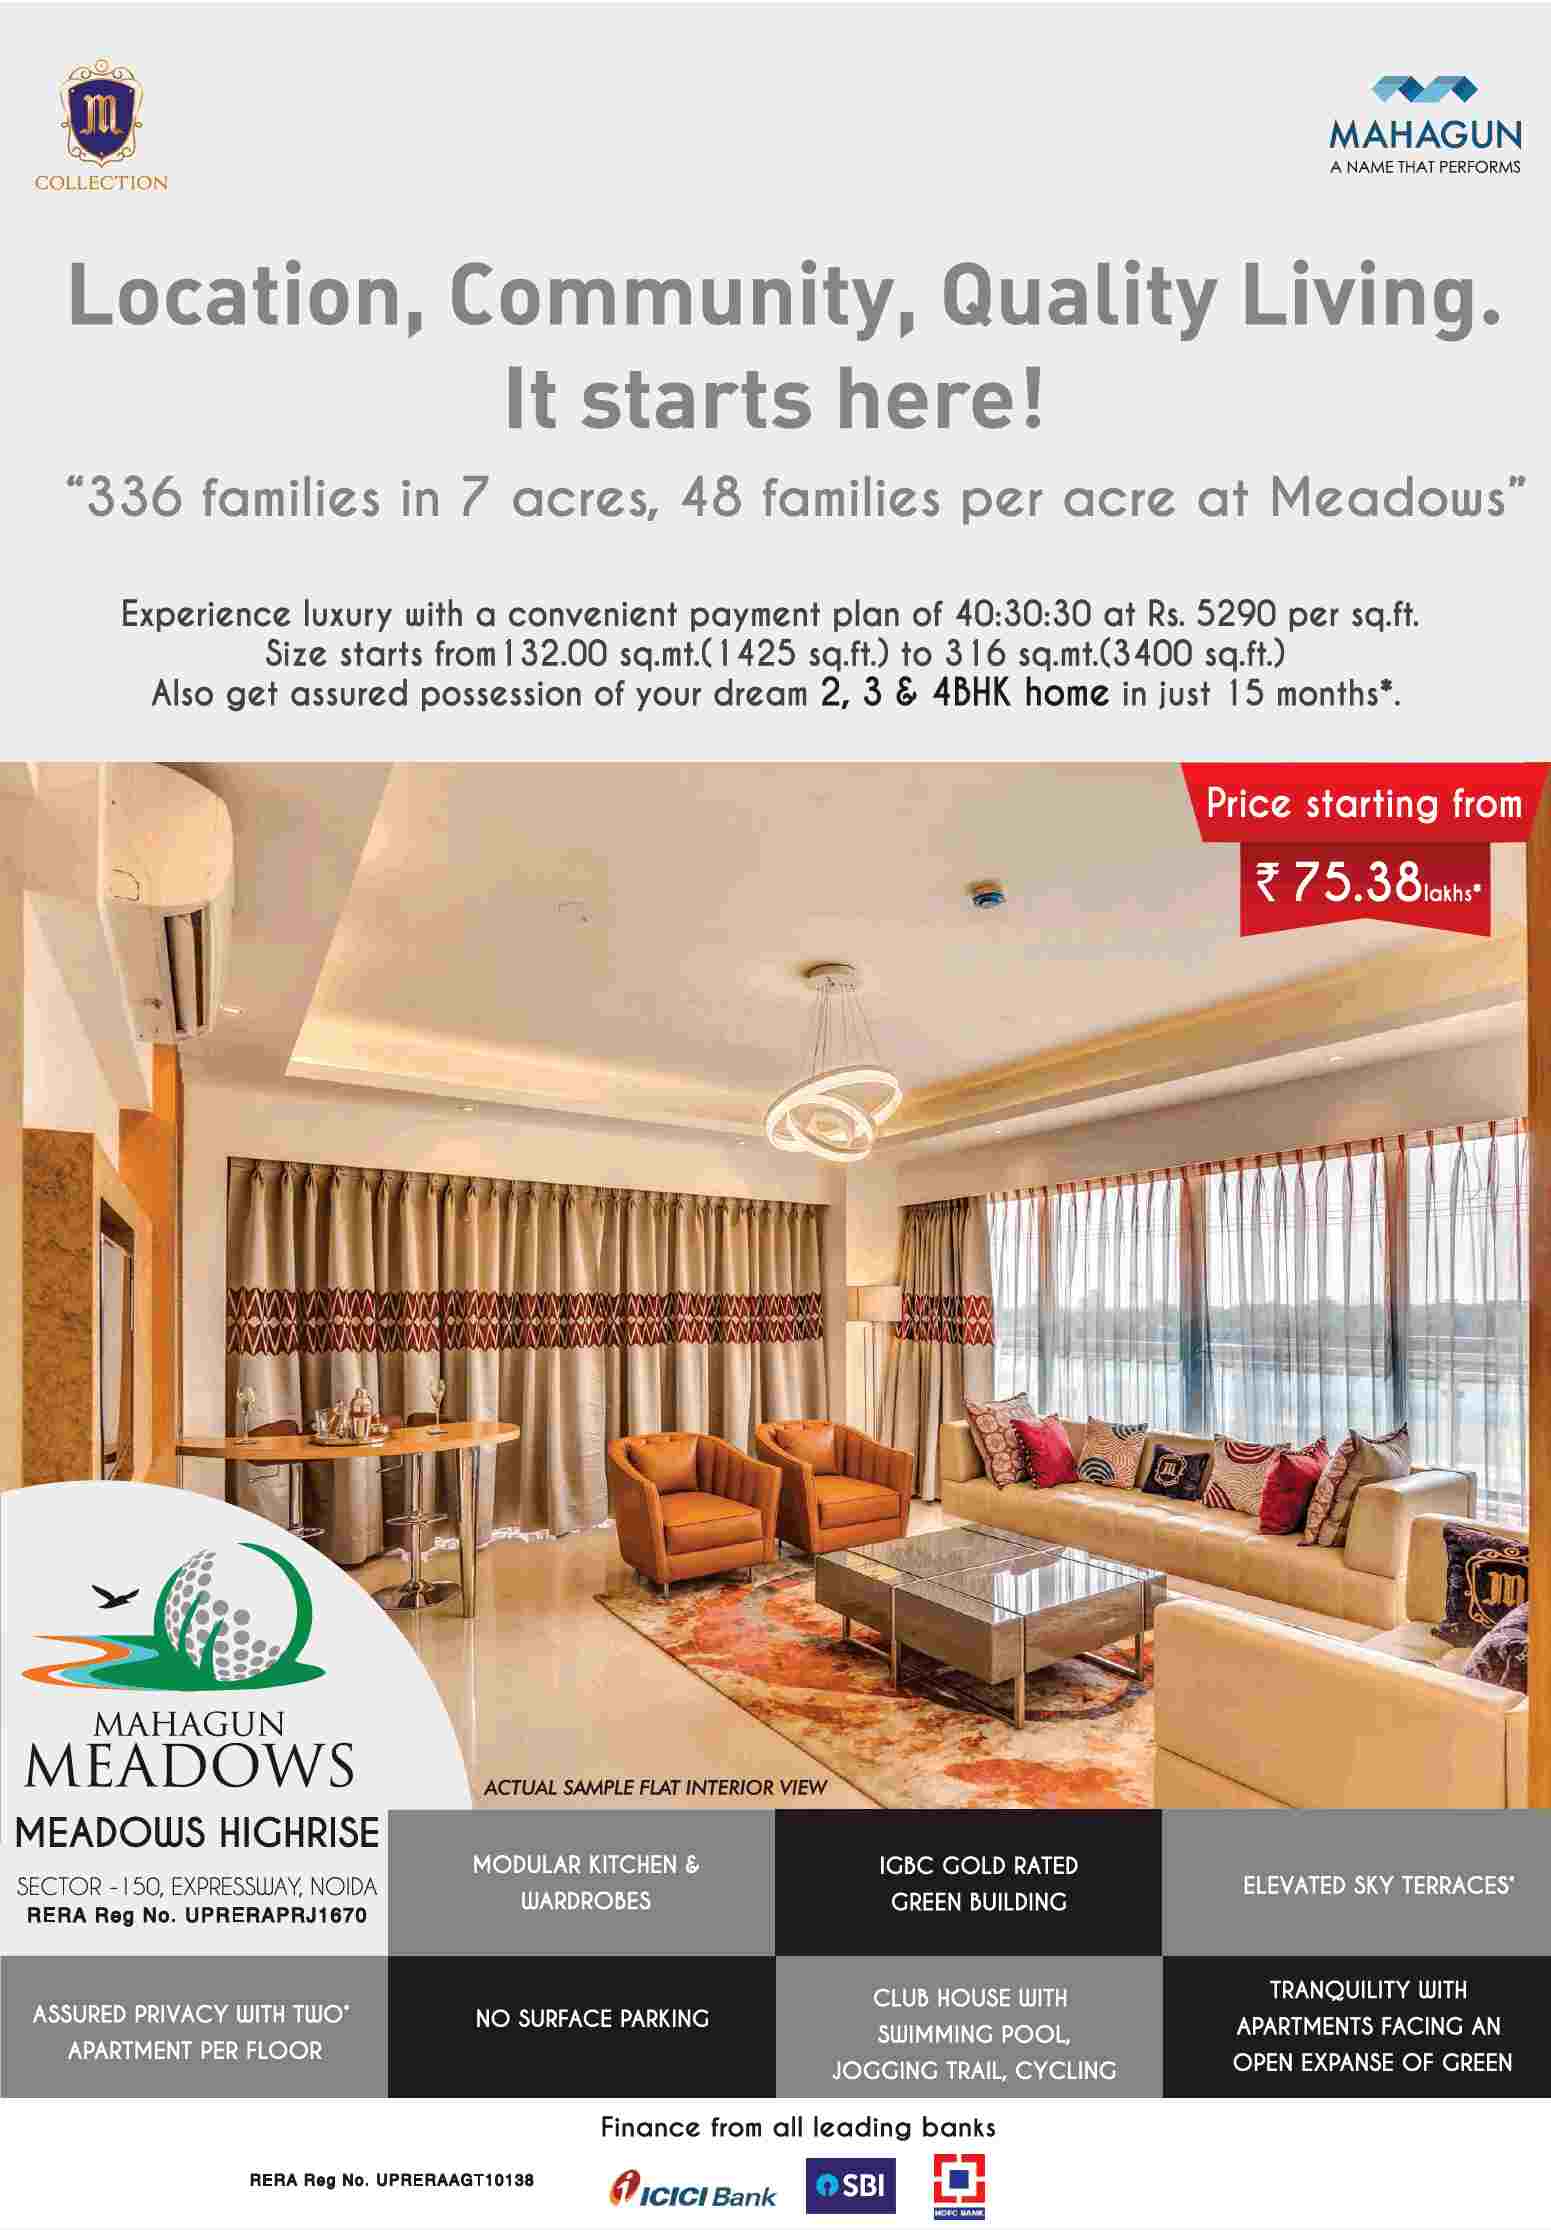 Experience luxury with a convenient payment plan of 40:30:30 at Mahagun Meadows in Noida